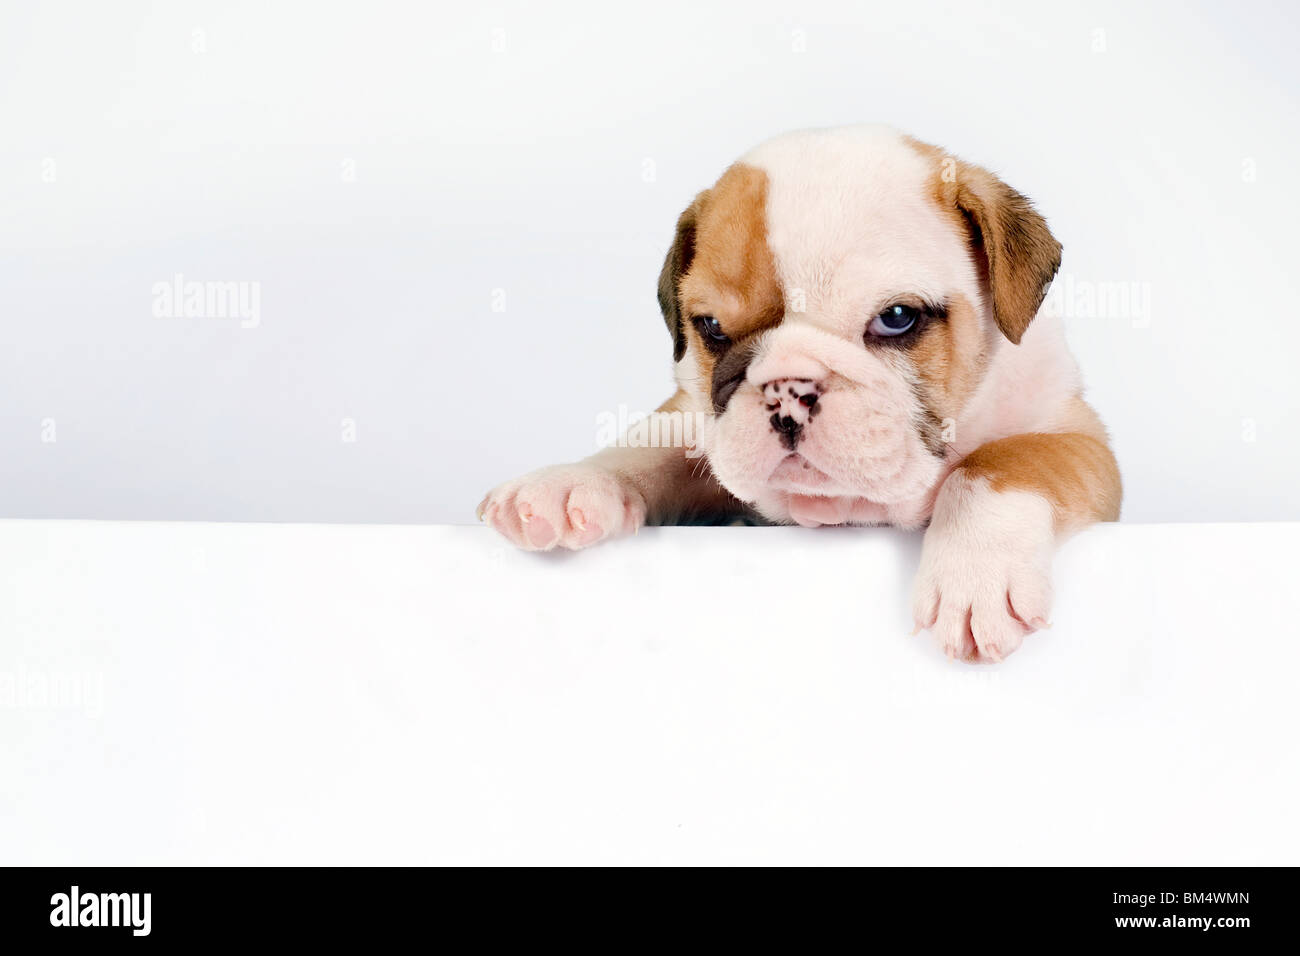 English Bulldog puppy in front of white background with space for text. Stock Photo